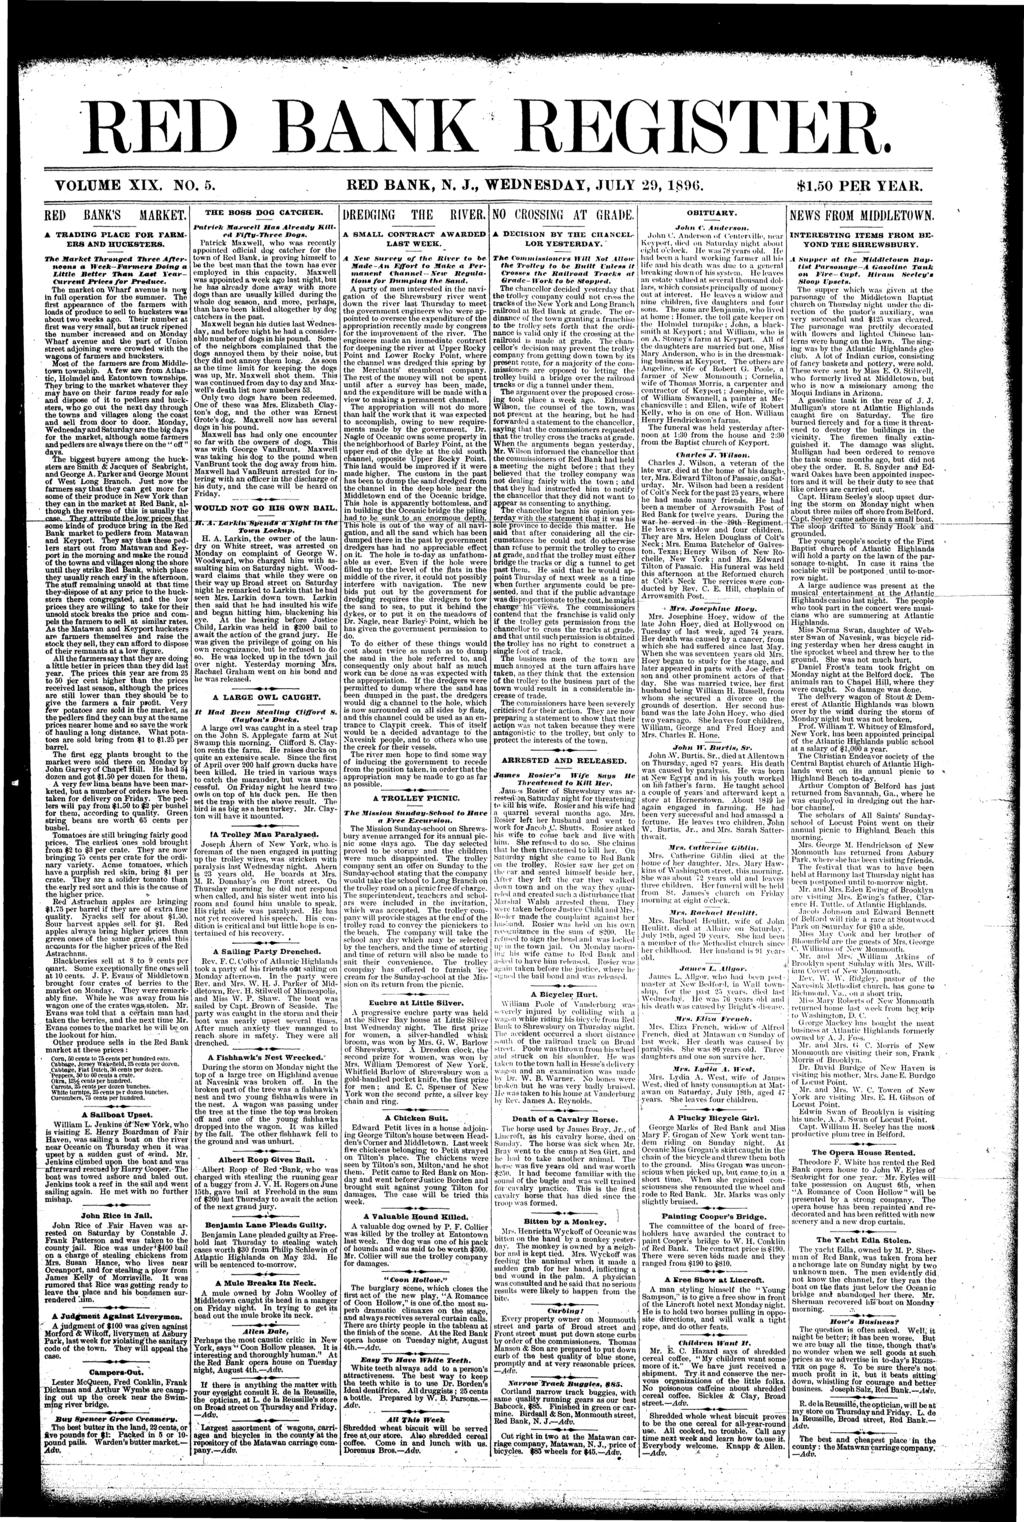 RED BANK REGSTER. RED BANK, N. J., WEDNESDAY, JULY 29, 1896. VOLUME XX. NO. 5, RED BAN S THE BOSS DOG CATCHER. MARKET. DREDGNG THE RVER. NO CROSSNG AT GRADE, $1.50 PER YEAR. OBTUARY.